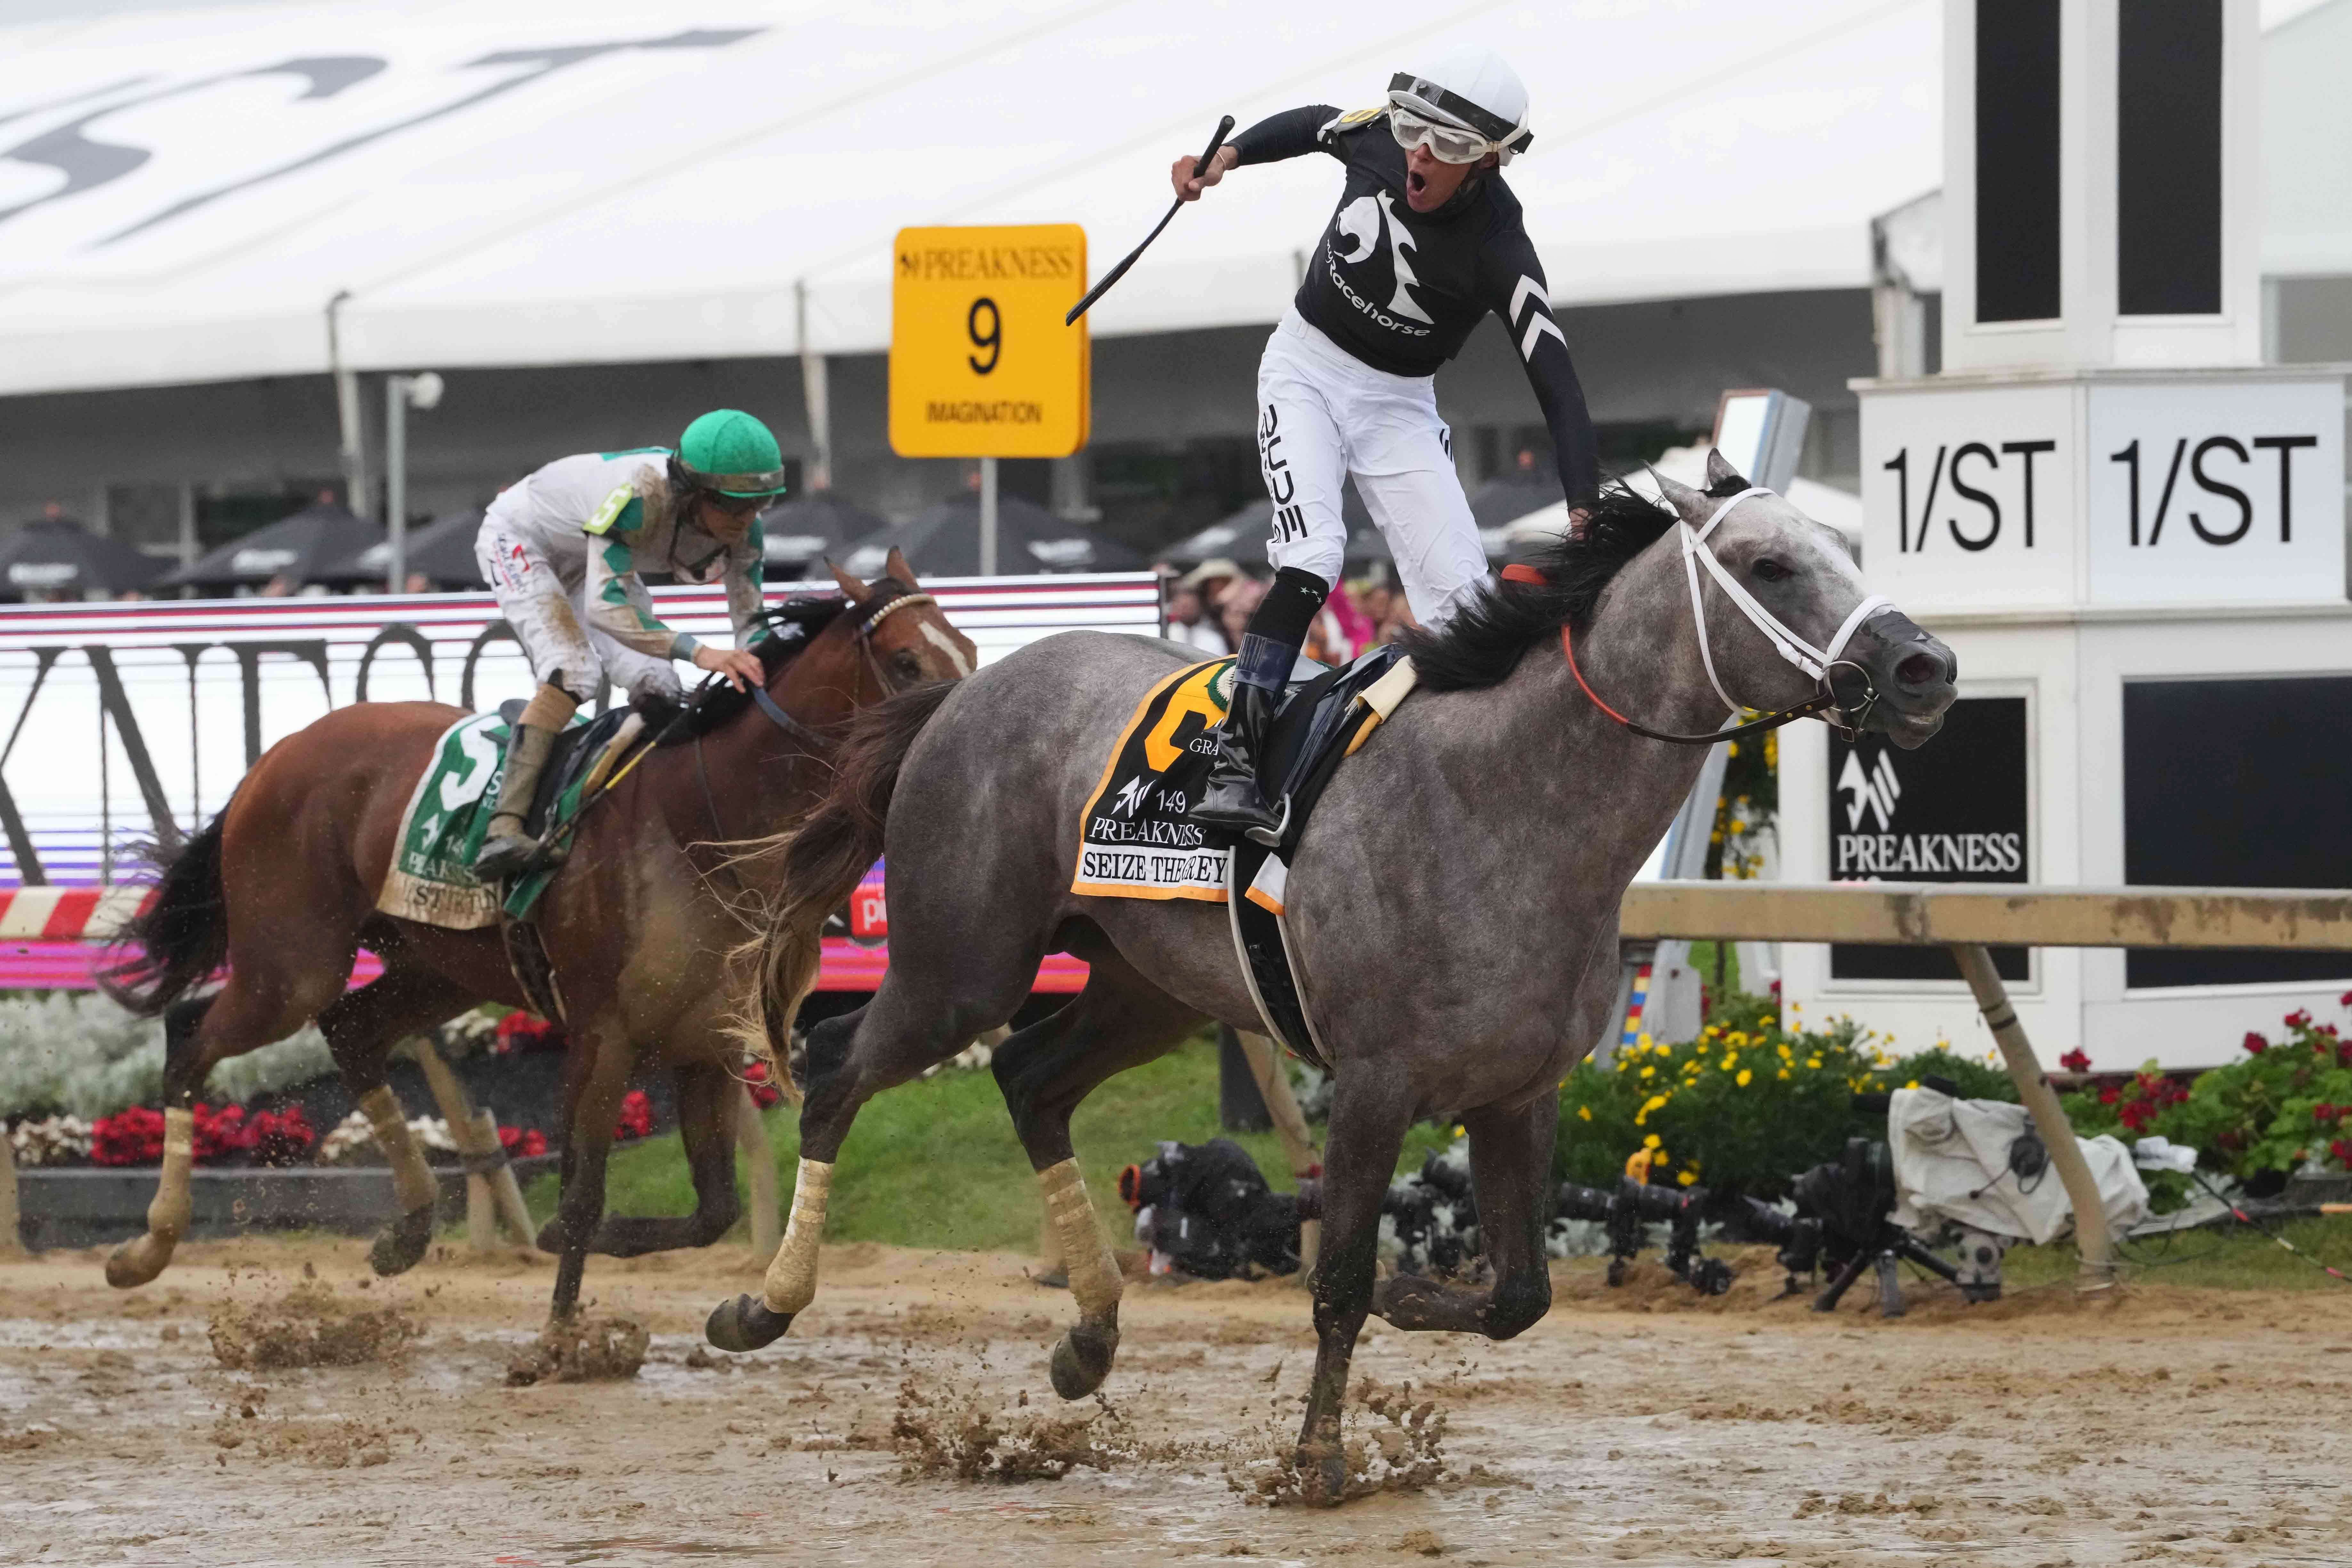 How To Bet - Preakness Stakes Odds: Seize the Grey Stuns Field, Mystik Dan Second-Best